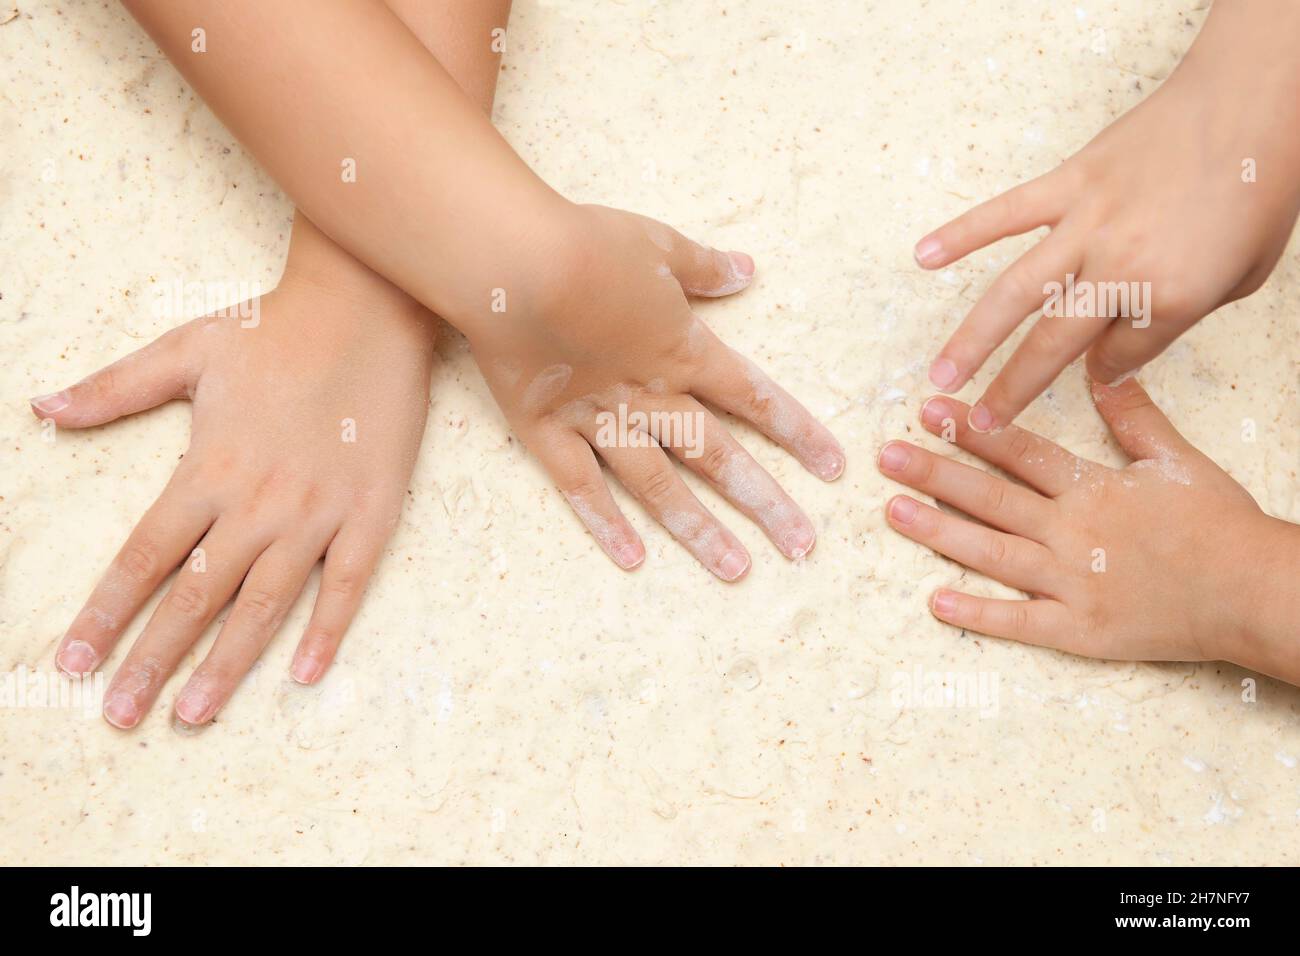 Children's hands preparing the dough for baking on the table. Shallow depth of field. SDF. Stock Photo